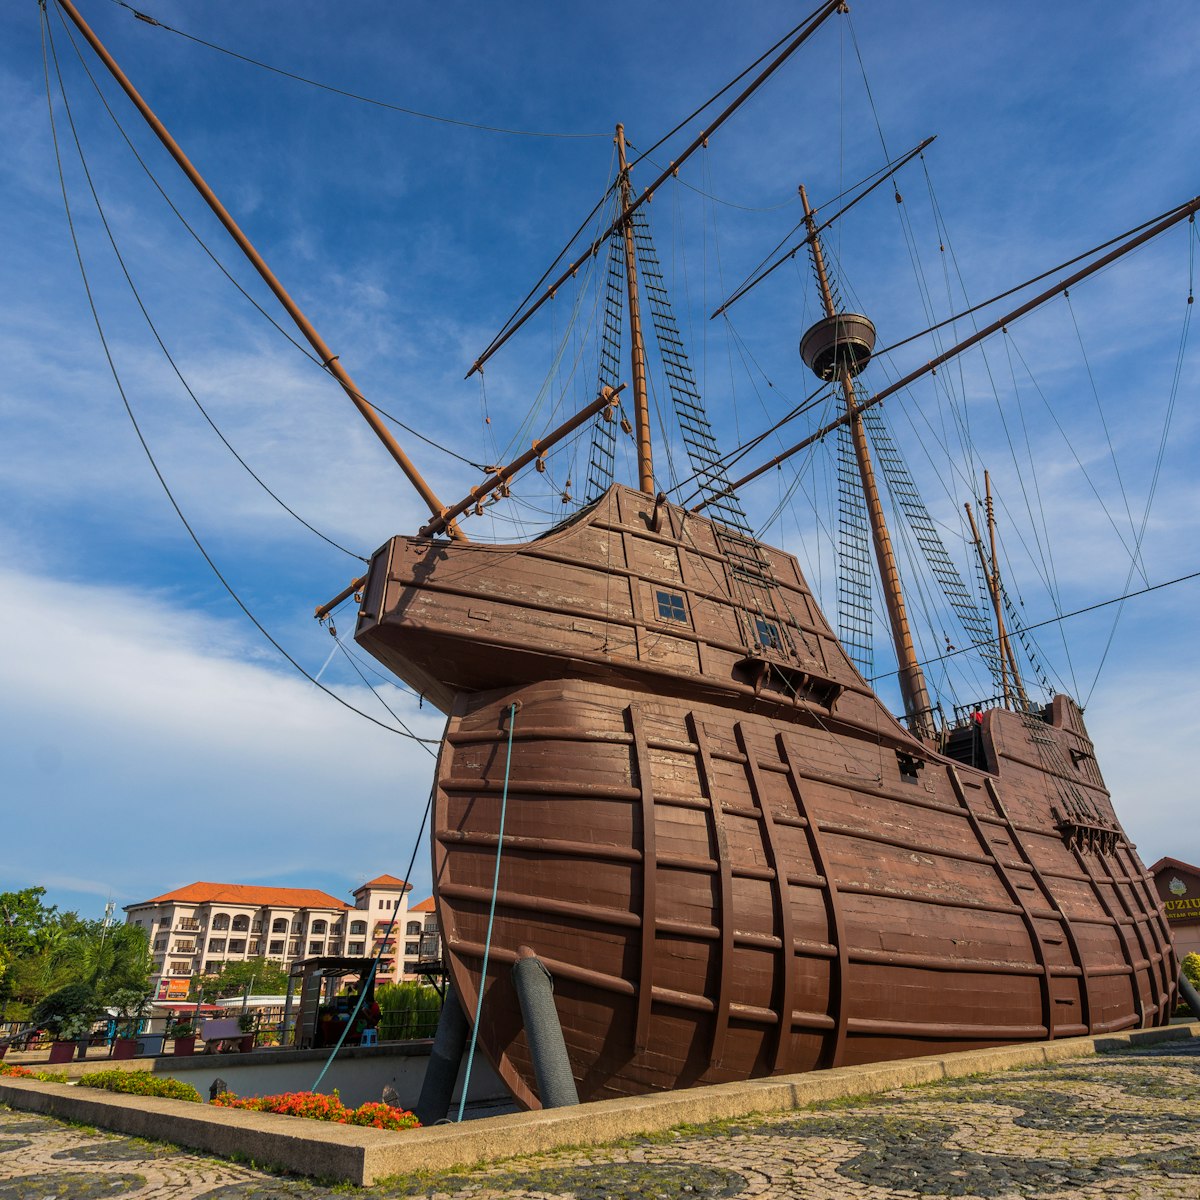 Singapore, Singapore - January 17, 2016 : Maritime Museum in Malacca City, Malaysia; Shutterstock ID 498671809; Your name (First / Last): Lauren Gillmroe; GL account no.: 56530; Netsuite department name: Online-Design; Full Product or Project name including edition: 65050/ Online Design /LaurenGillmore/POI